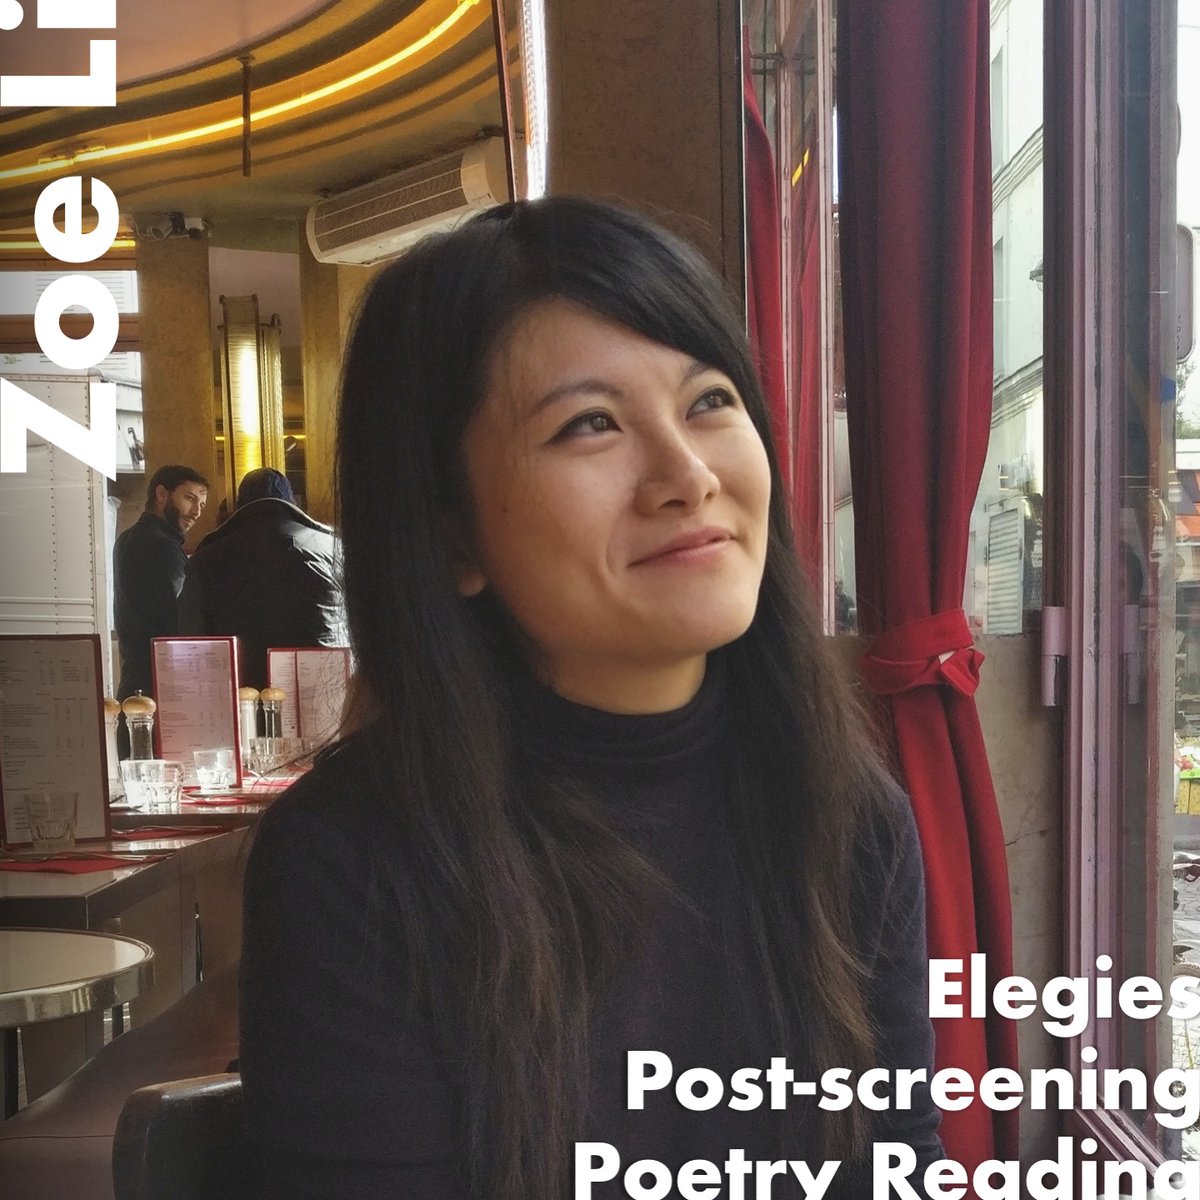 Following screening of Ann Hui's ELEGIES on Hong Kong poetry, we are thrilled to welcome @timtimtmi and @metapheric, two UK-based HK poets, to share their literary works, moderated by Zoe Li from Juniper by the Sea. 📅8 Jun ⏲️16:00 📍@ICALondon 🎟️beacons.ai/hkff.uk (1/4)